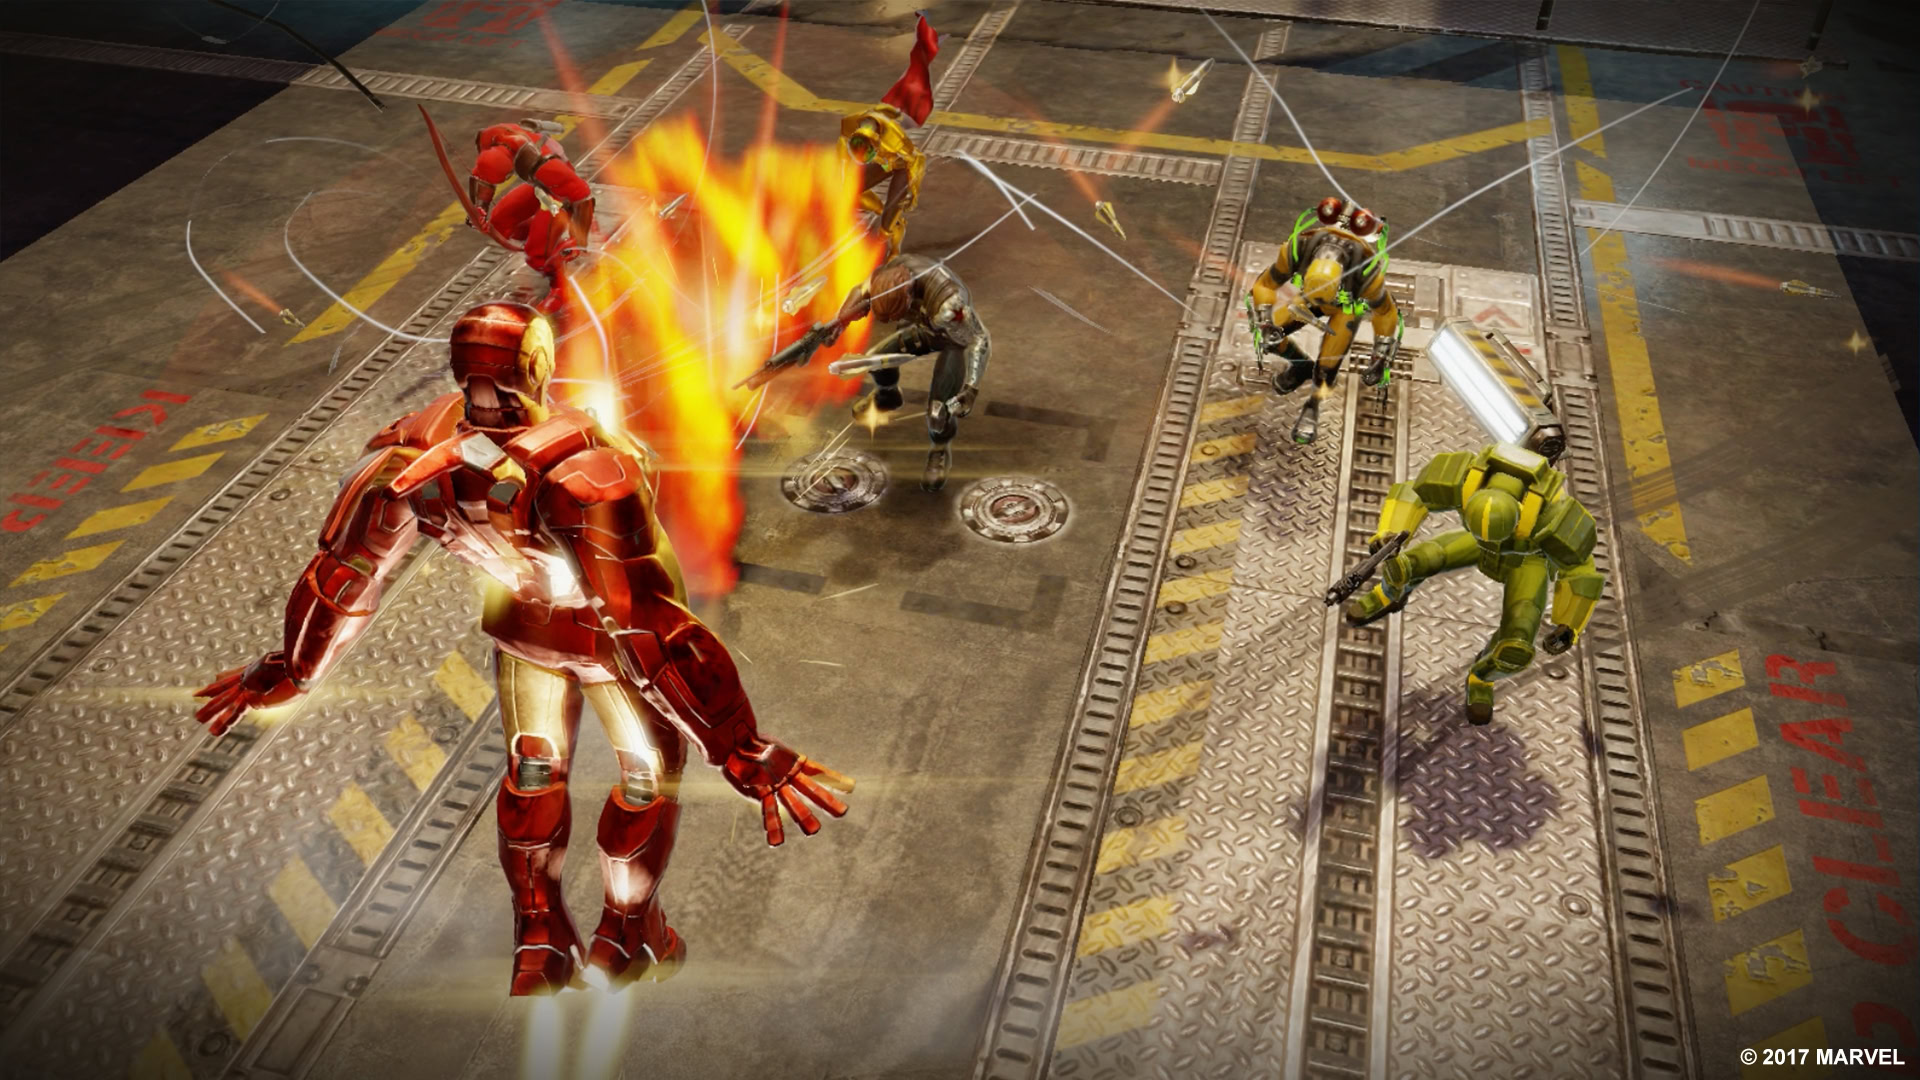 Marvel Strike Force Mobile RPG Game Lets You Play As Iconic